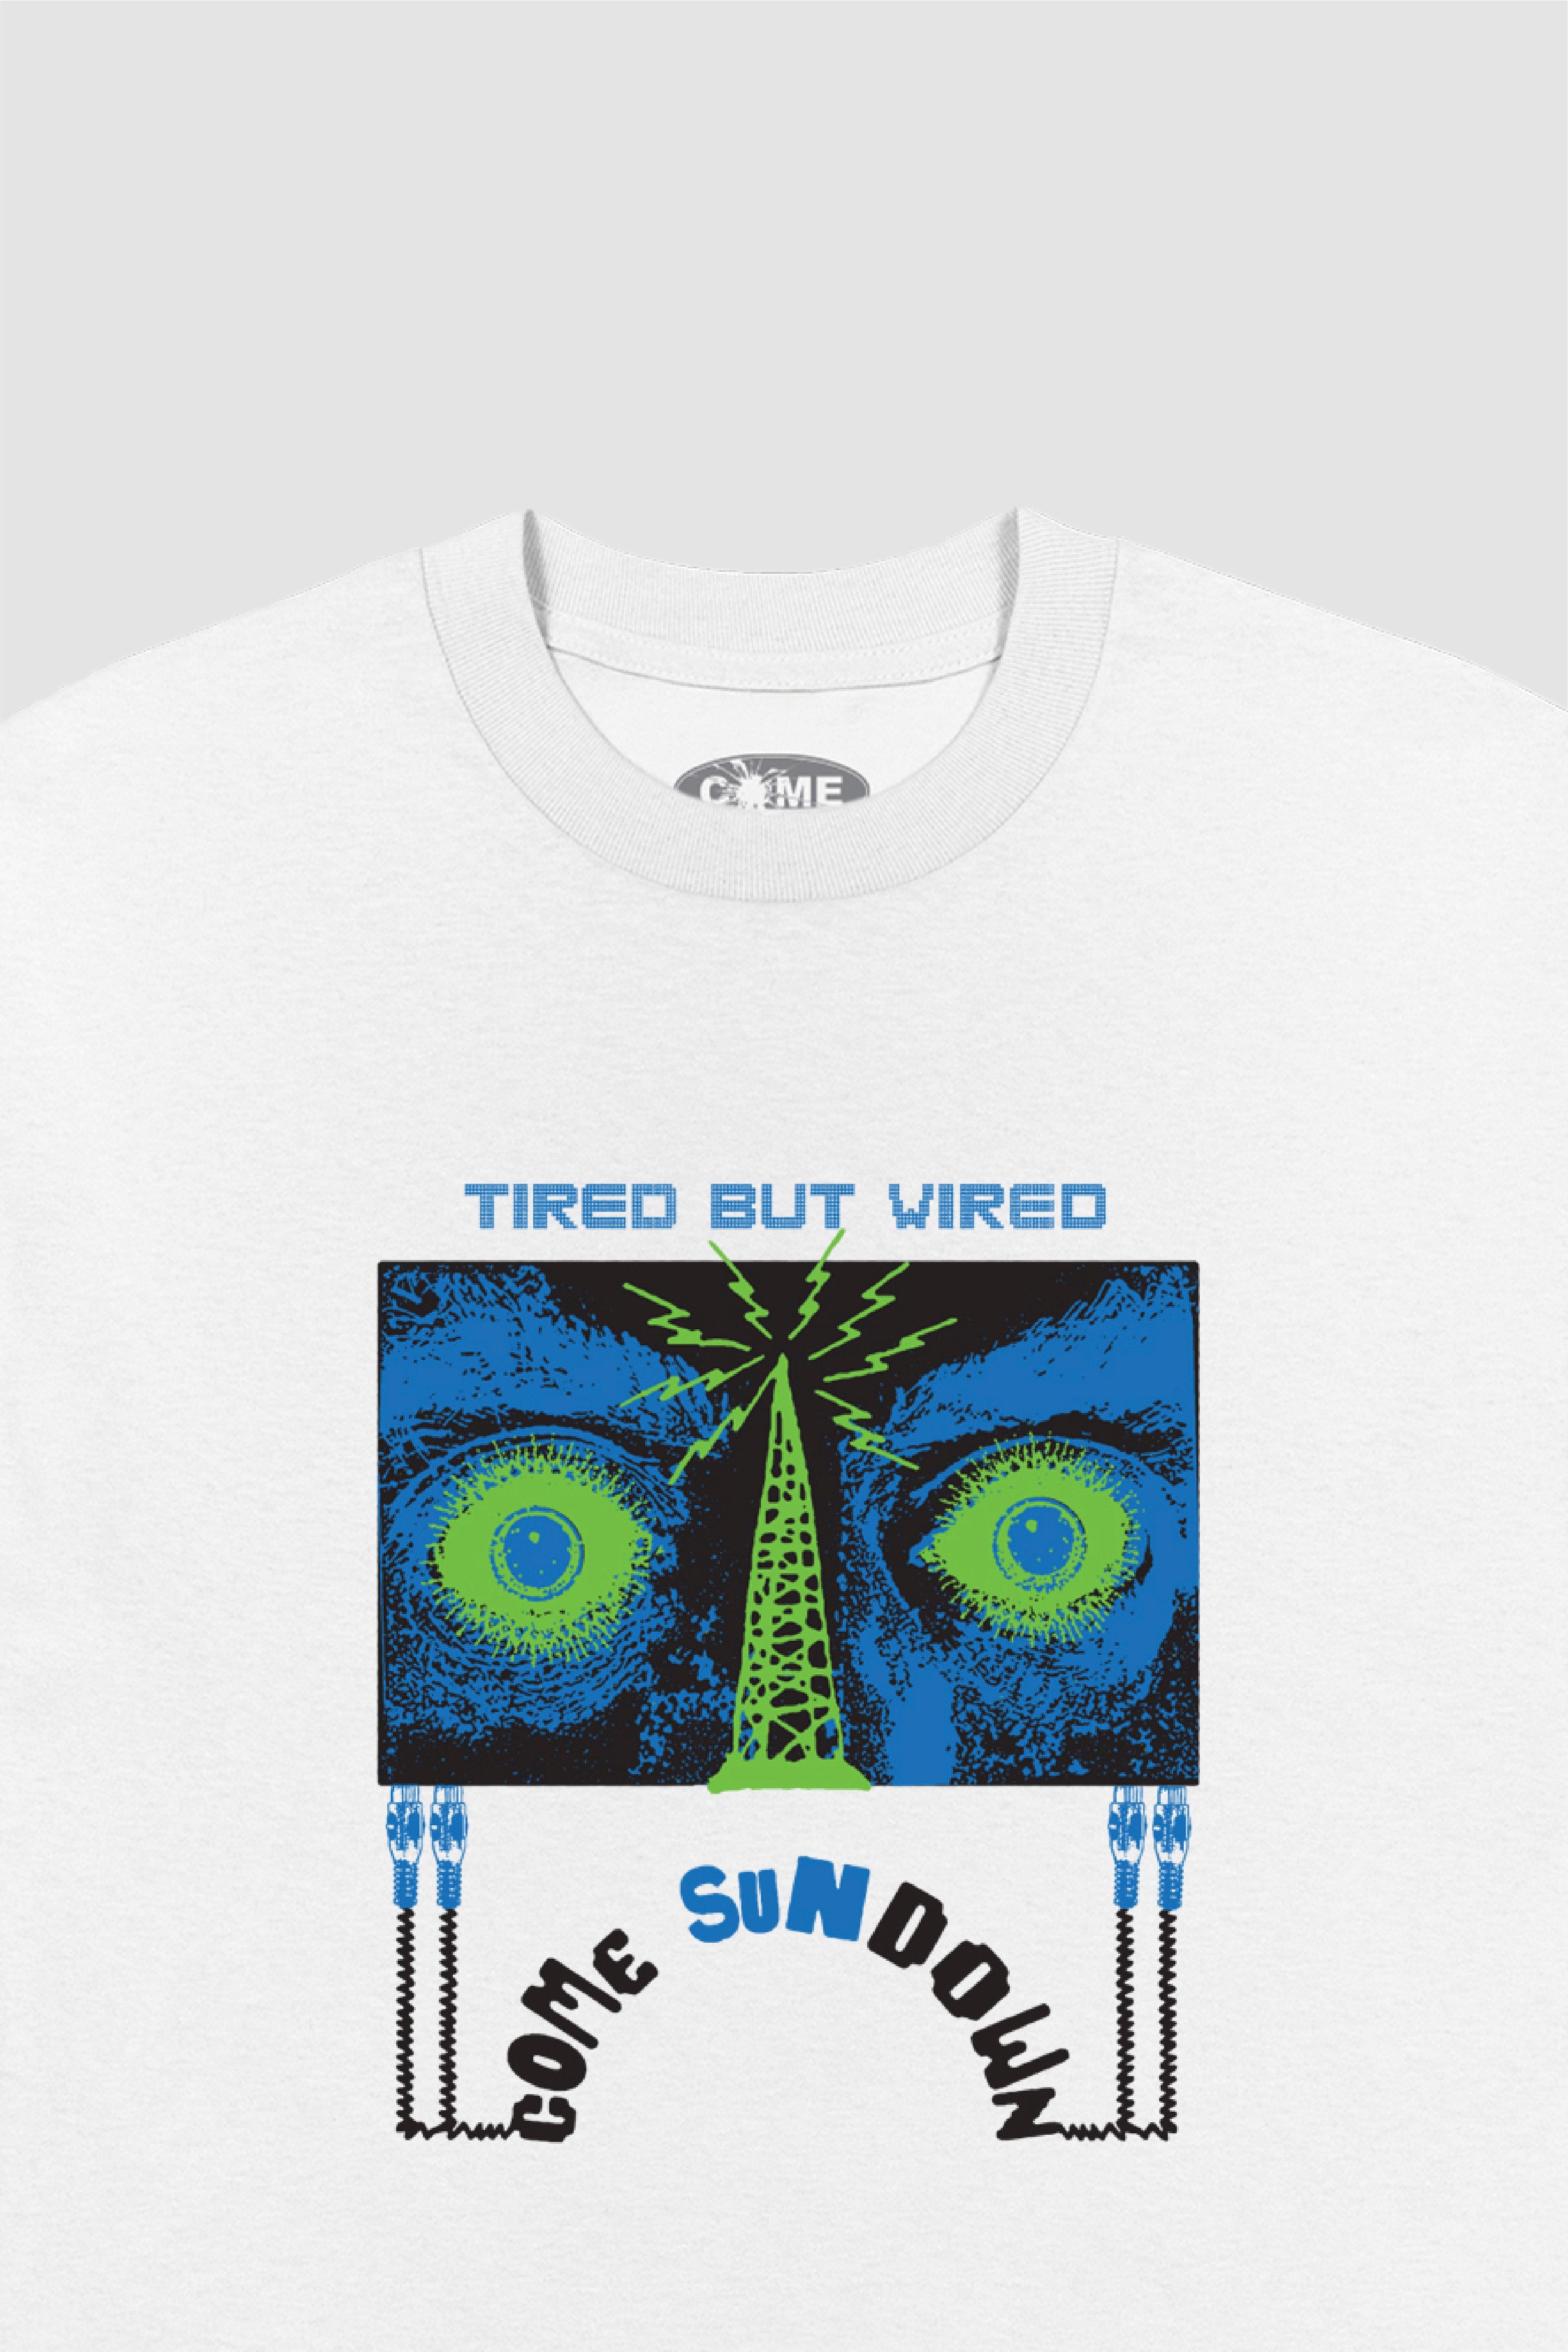 Selectshop FRAME - COME SUNDOWN Tired But Wired Tee T-Shirts Concept Store Dubai